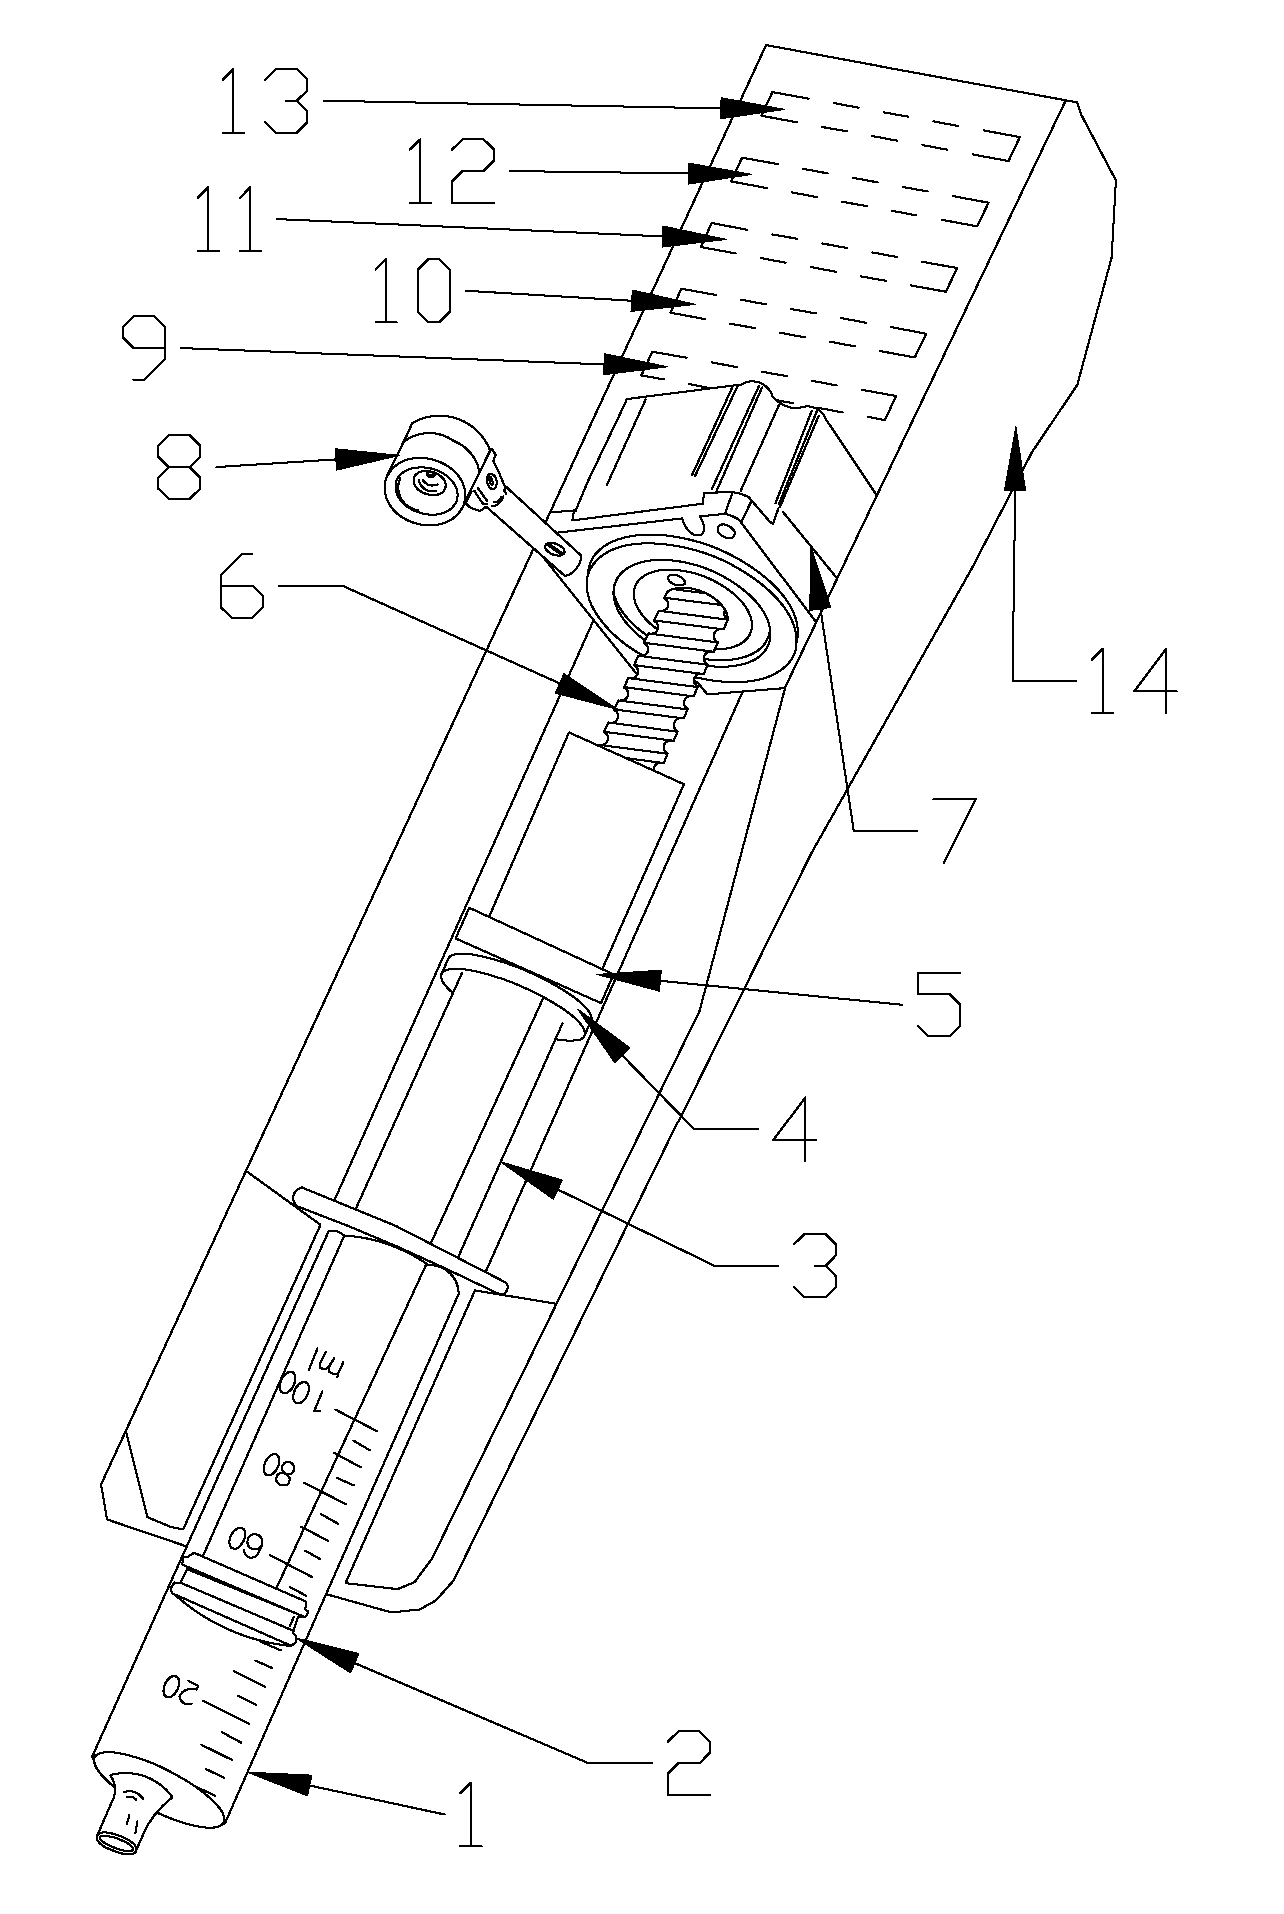 Remote control injection device with camera